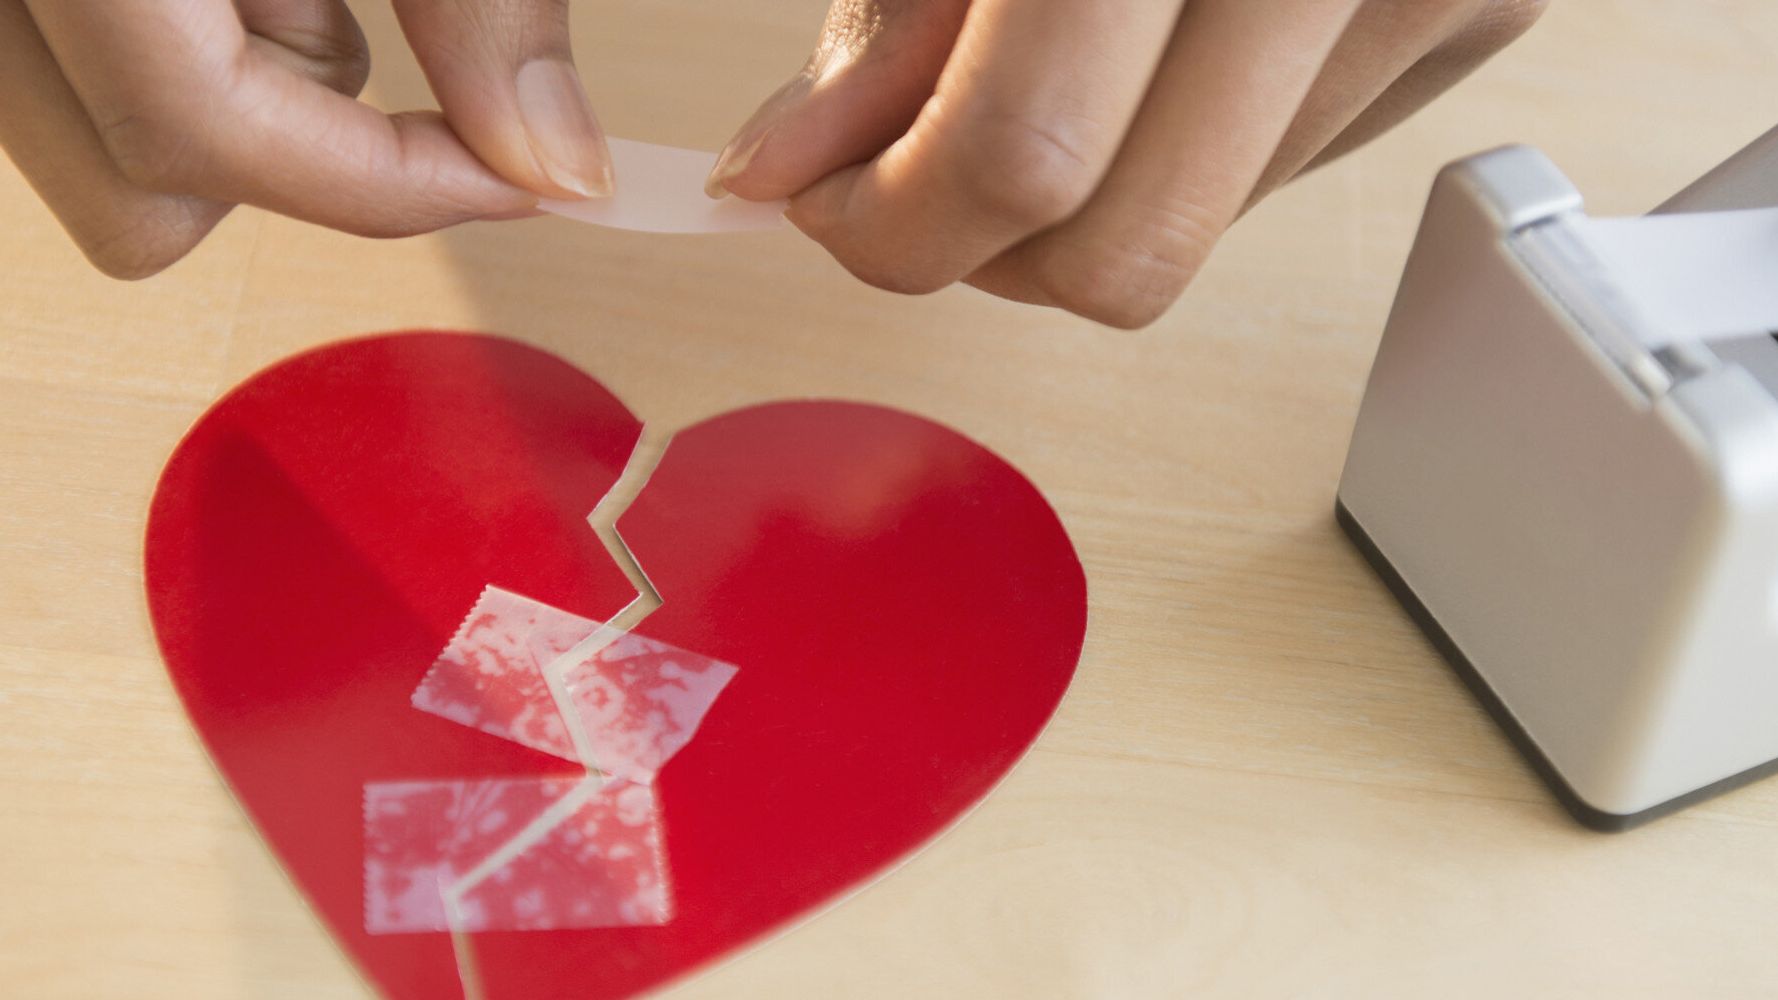 Love Hurts: The Science of a Broken Heart